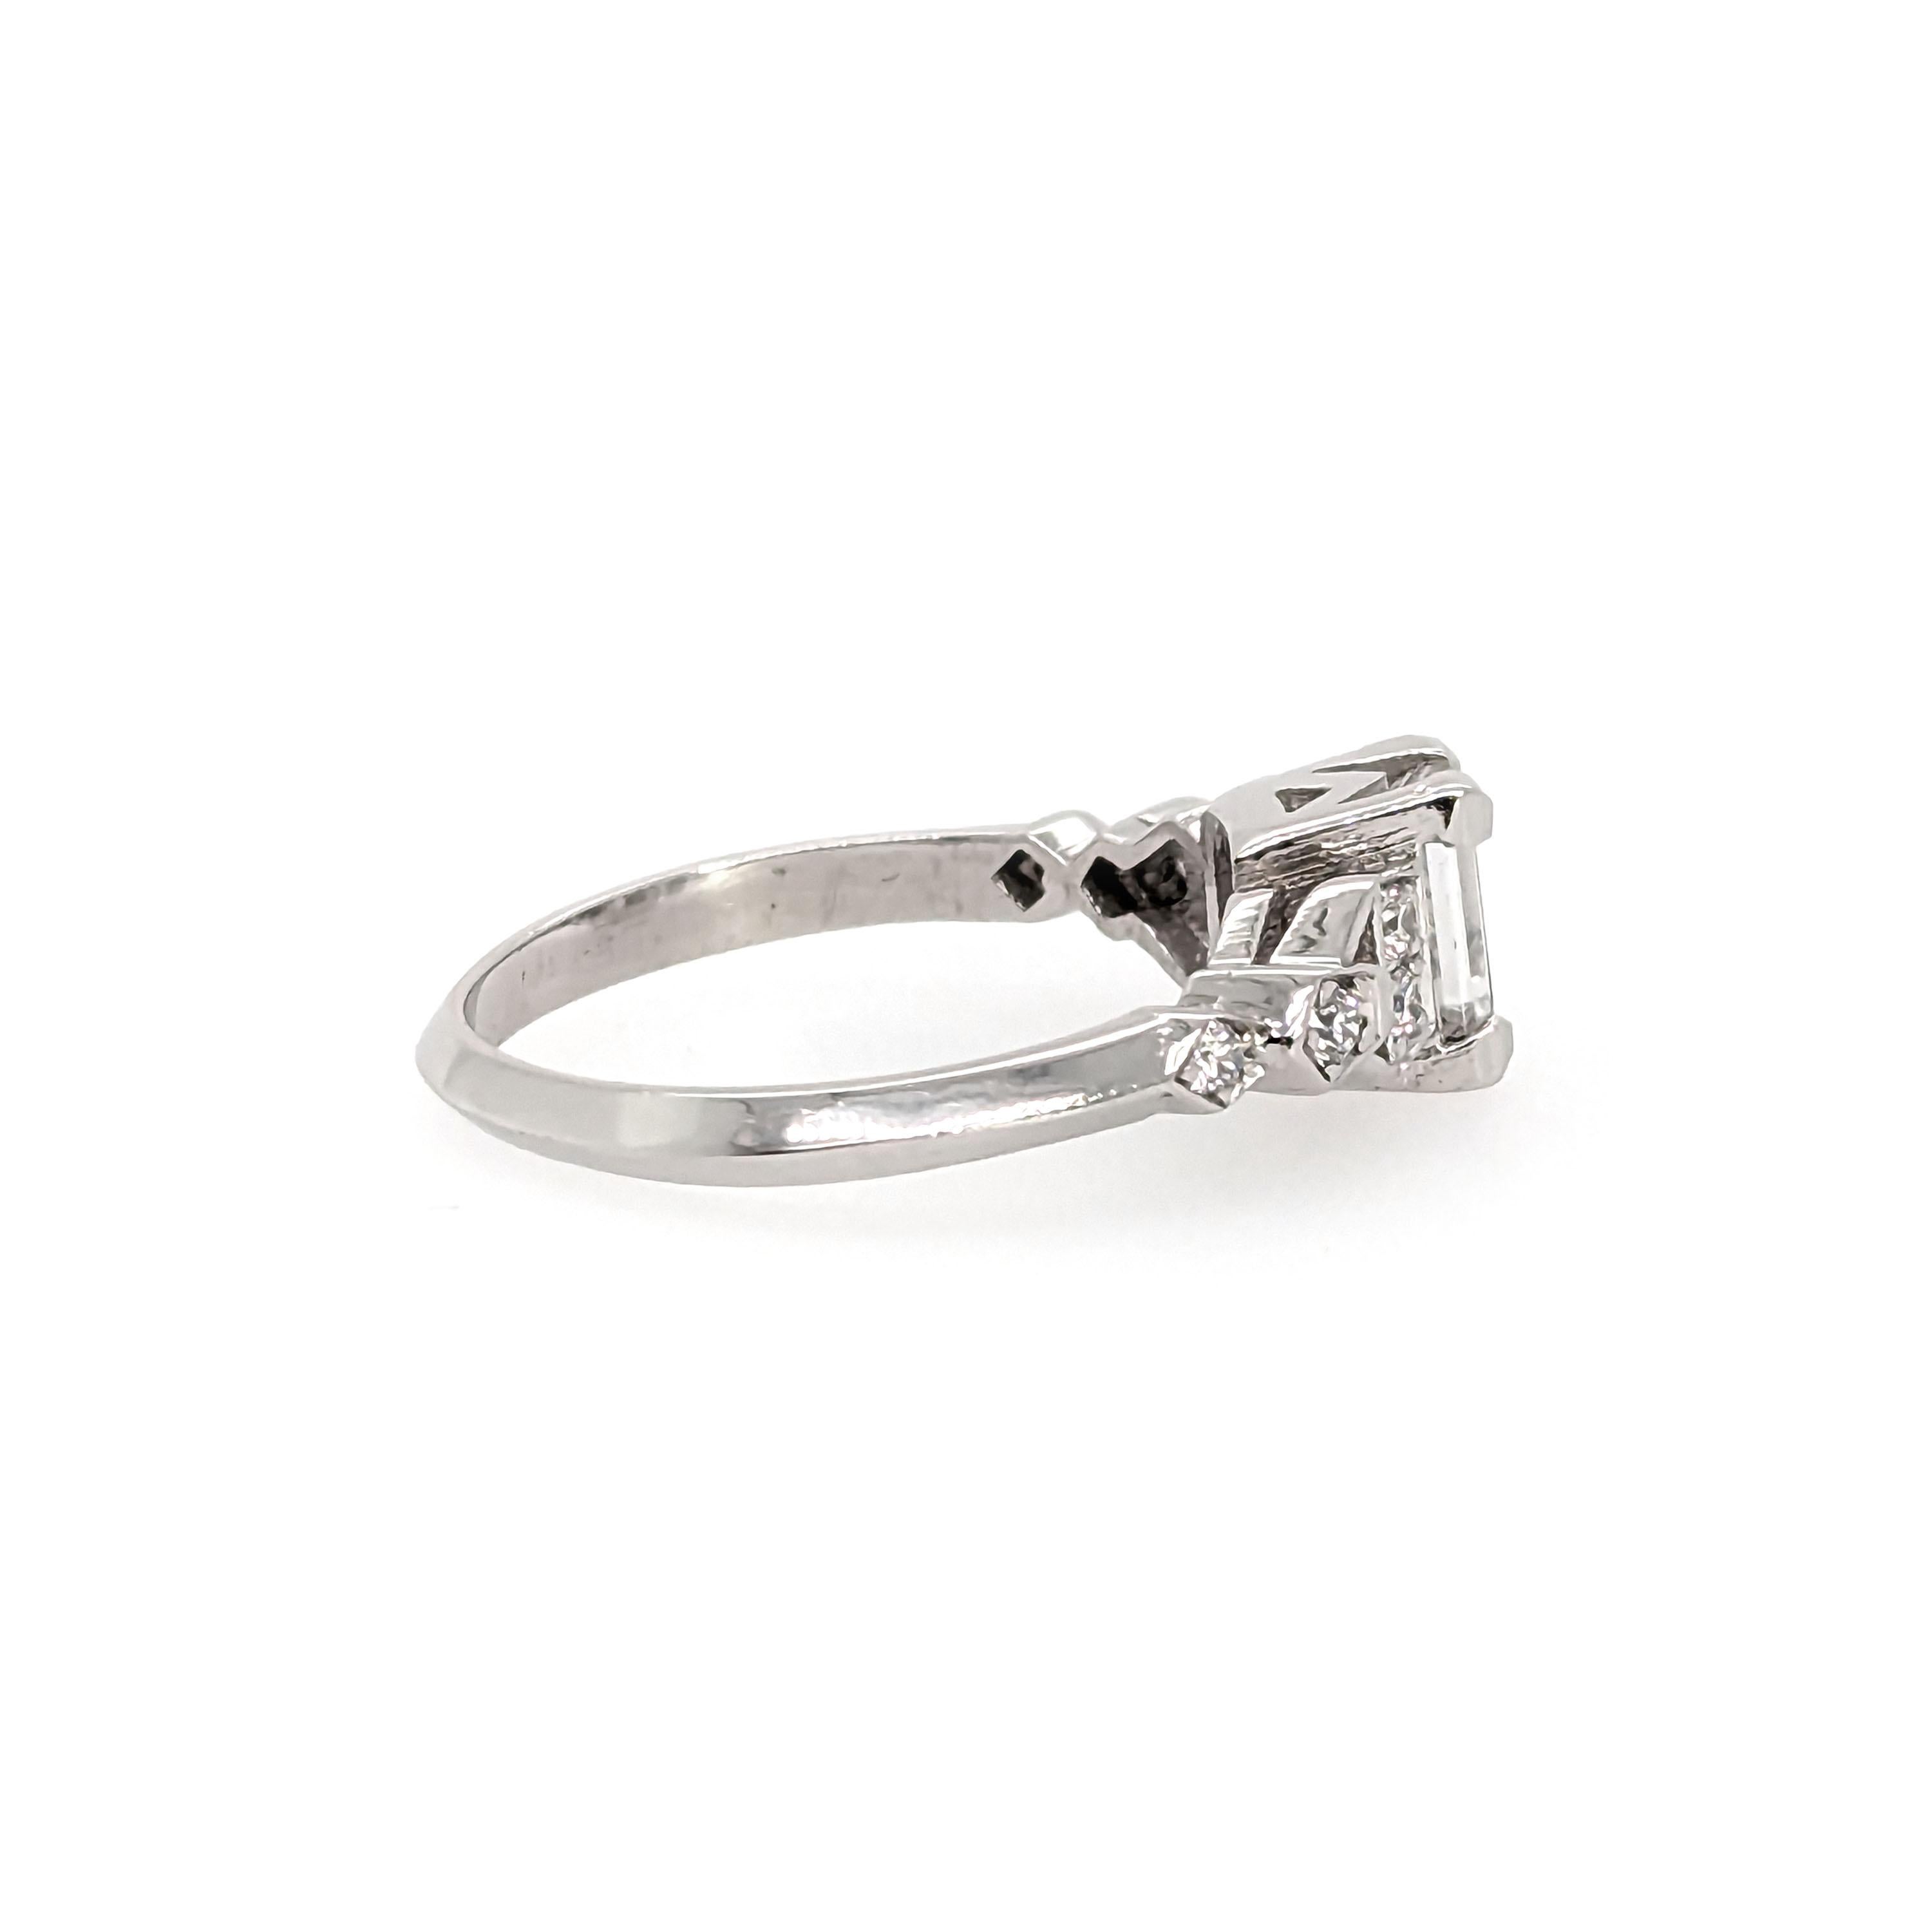 Women's Vintage Diamond And Platinum Ring, 0.81 Carats F VS2, Circa 1950 For Sale